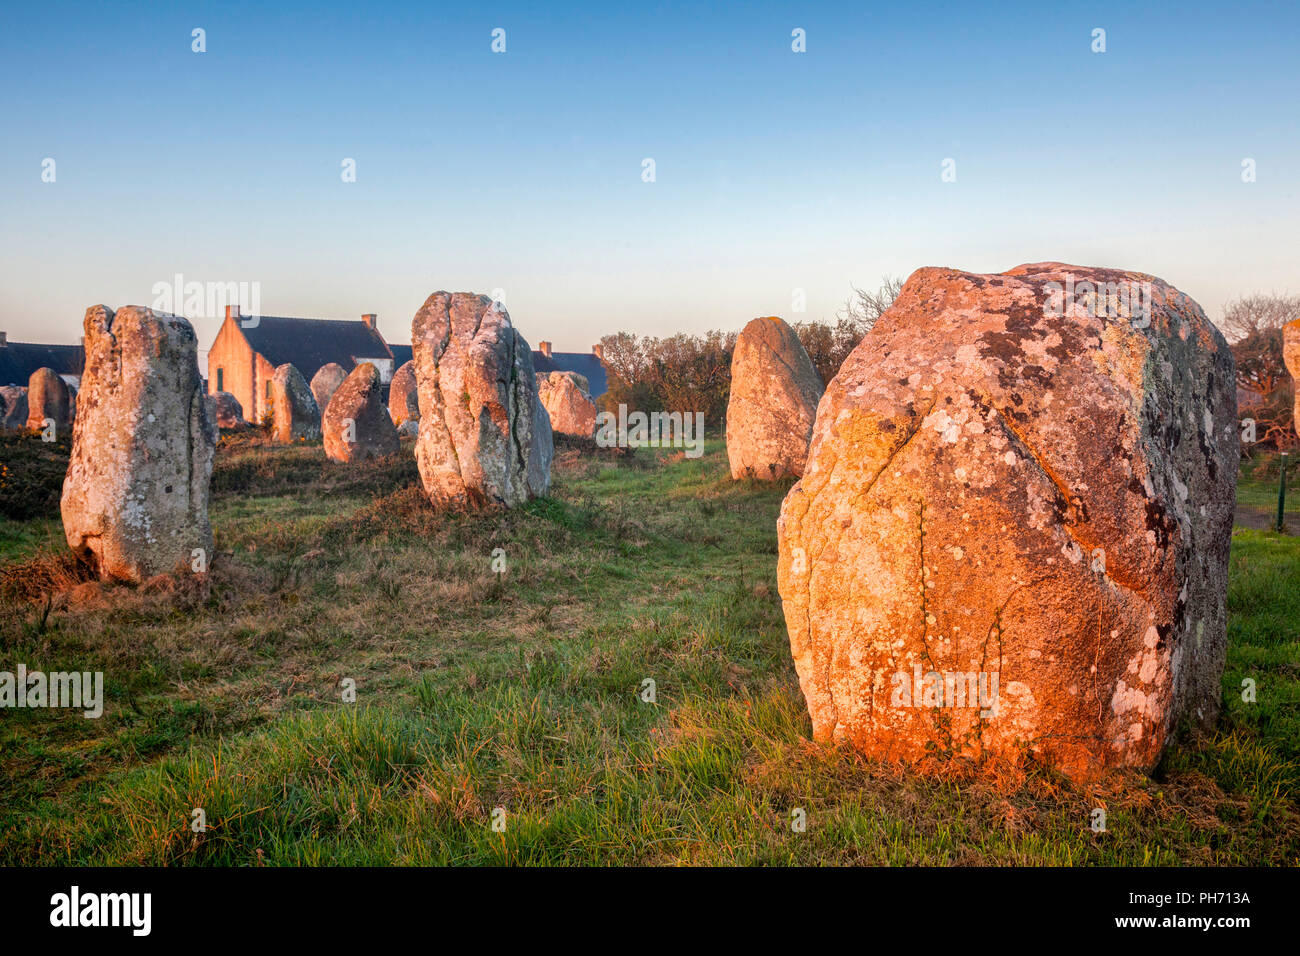 Standing stones at world famous Carnac, Brittany, France. The site is a UNESCO World Heritage Area. Stock Photo